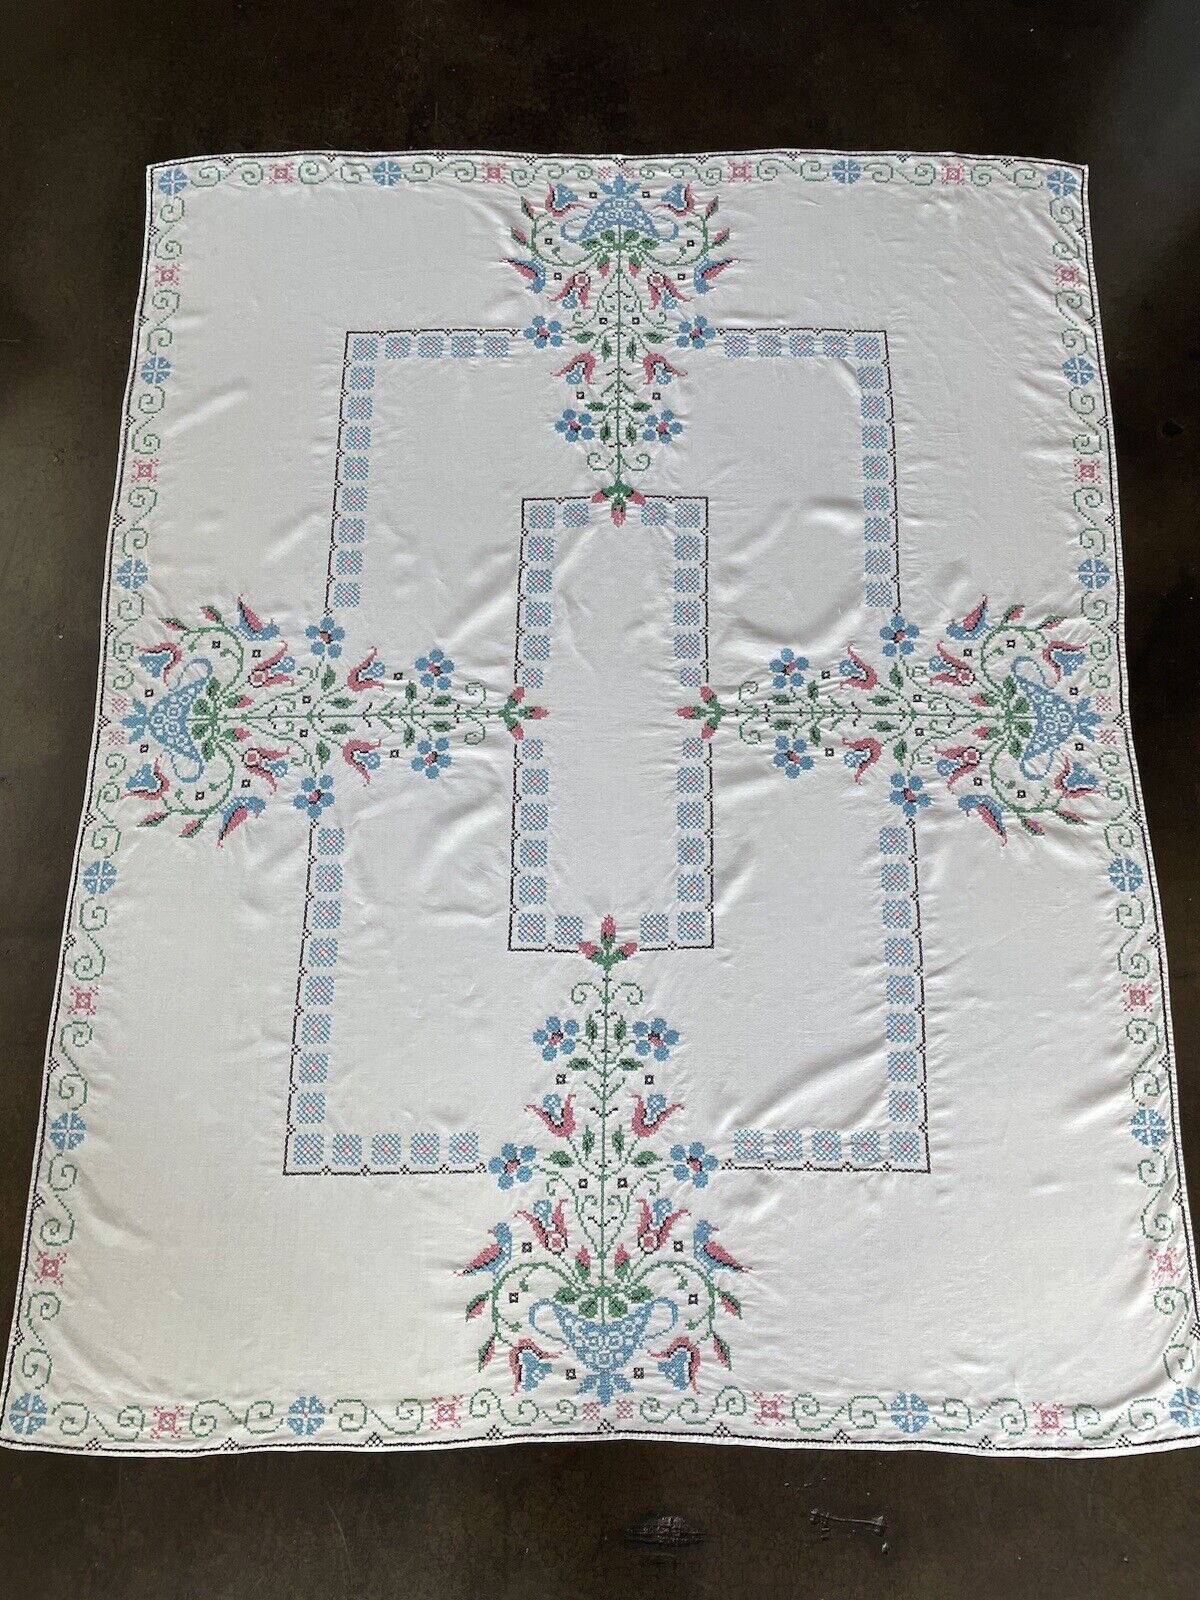 Vintage Hand Cross Stitched Floral Rectangle Tablecloth 82” x 65”